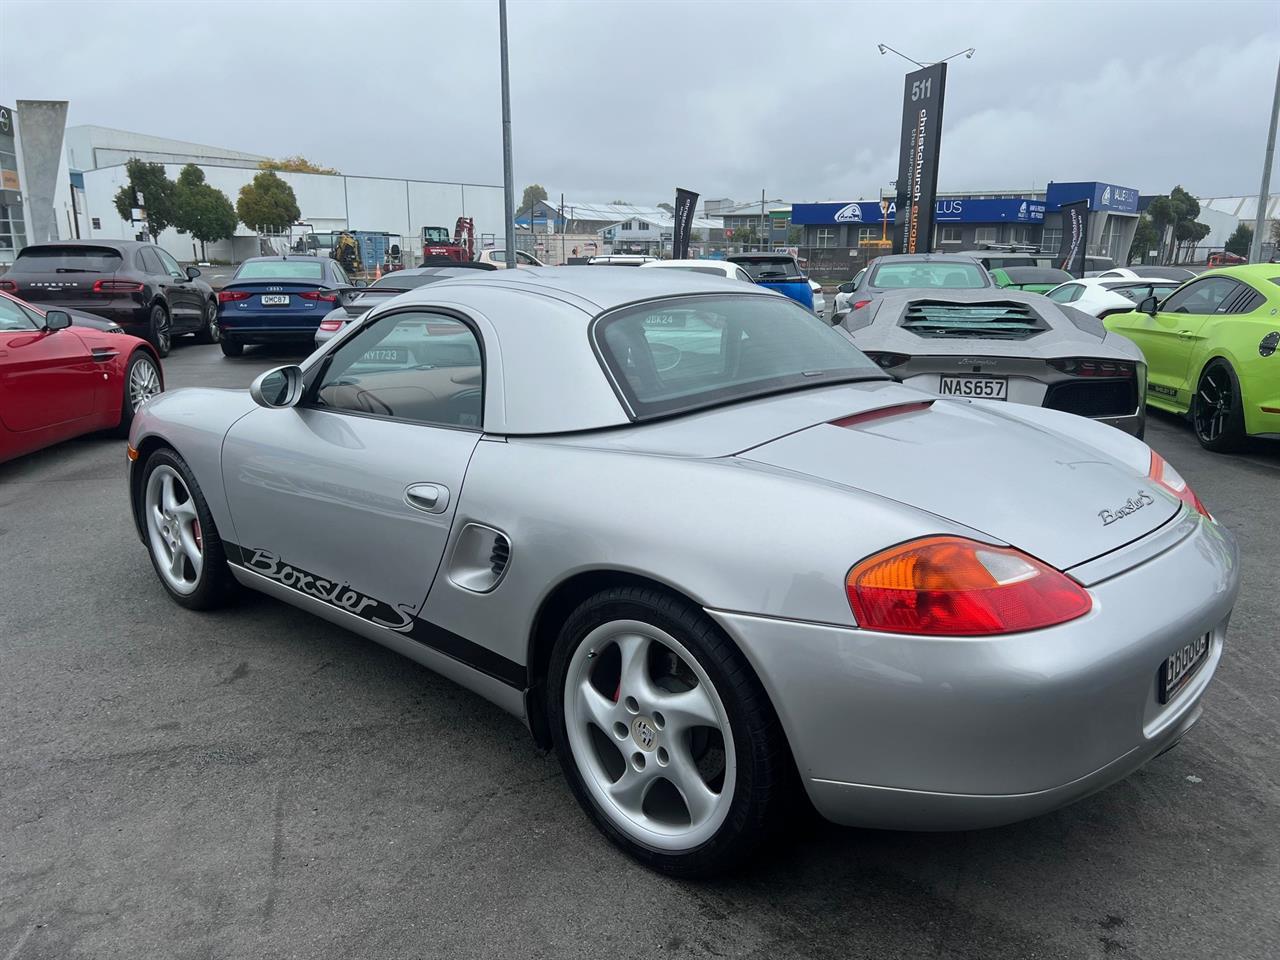 image-4, 2000 Porsche Boxster S 6 Speed Manual at Christchurch